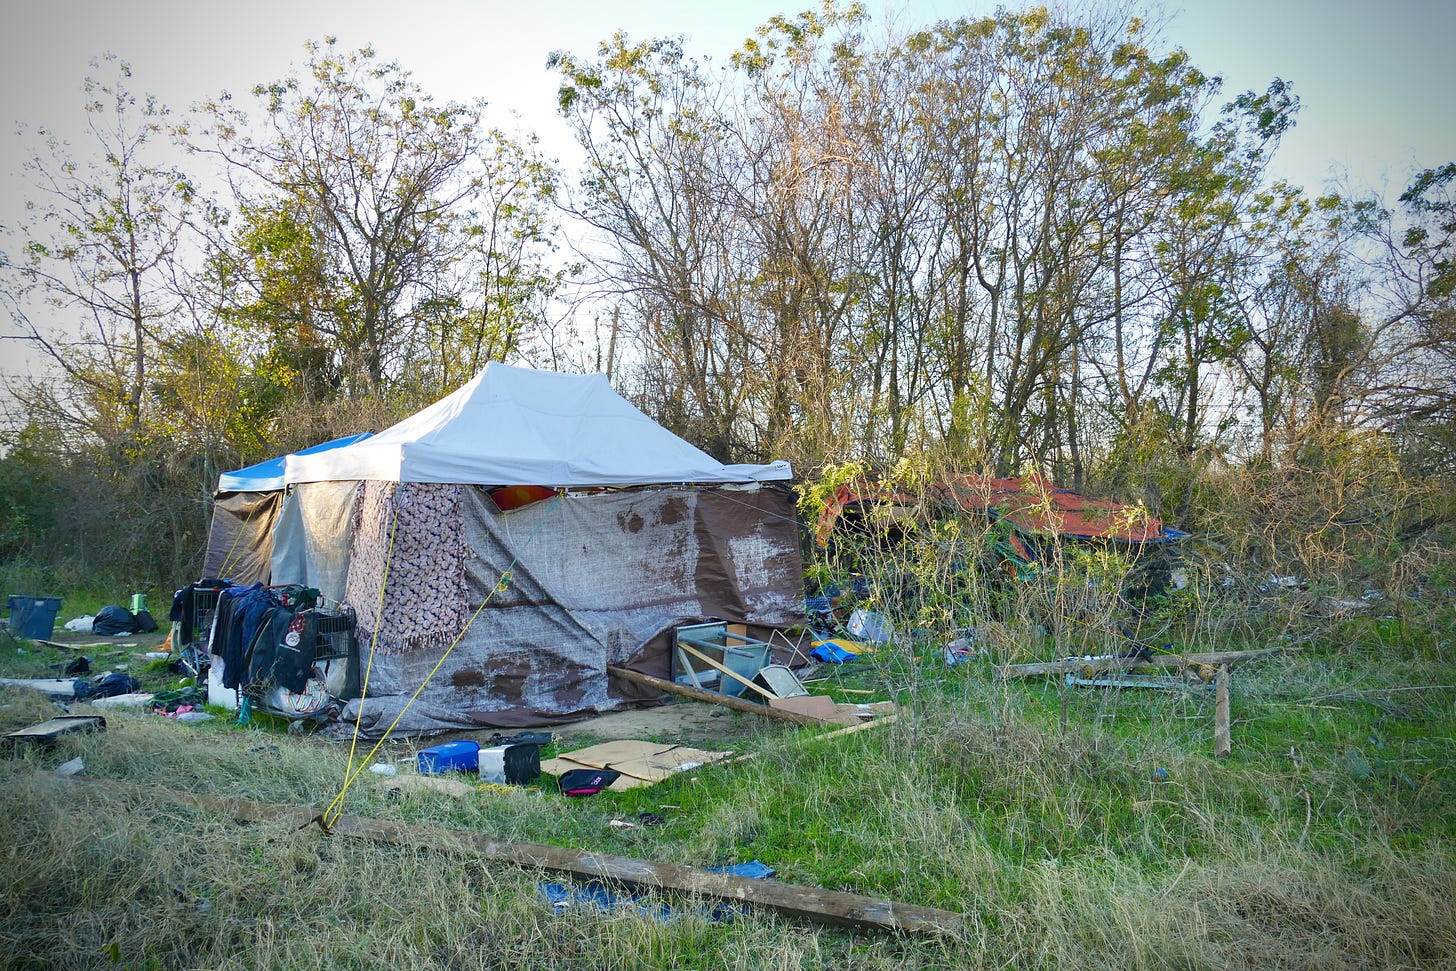 Picture of a homeless camp, with large and elaborately constructed tents made of a mix of bought and found materials